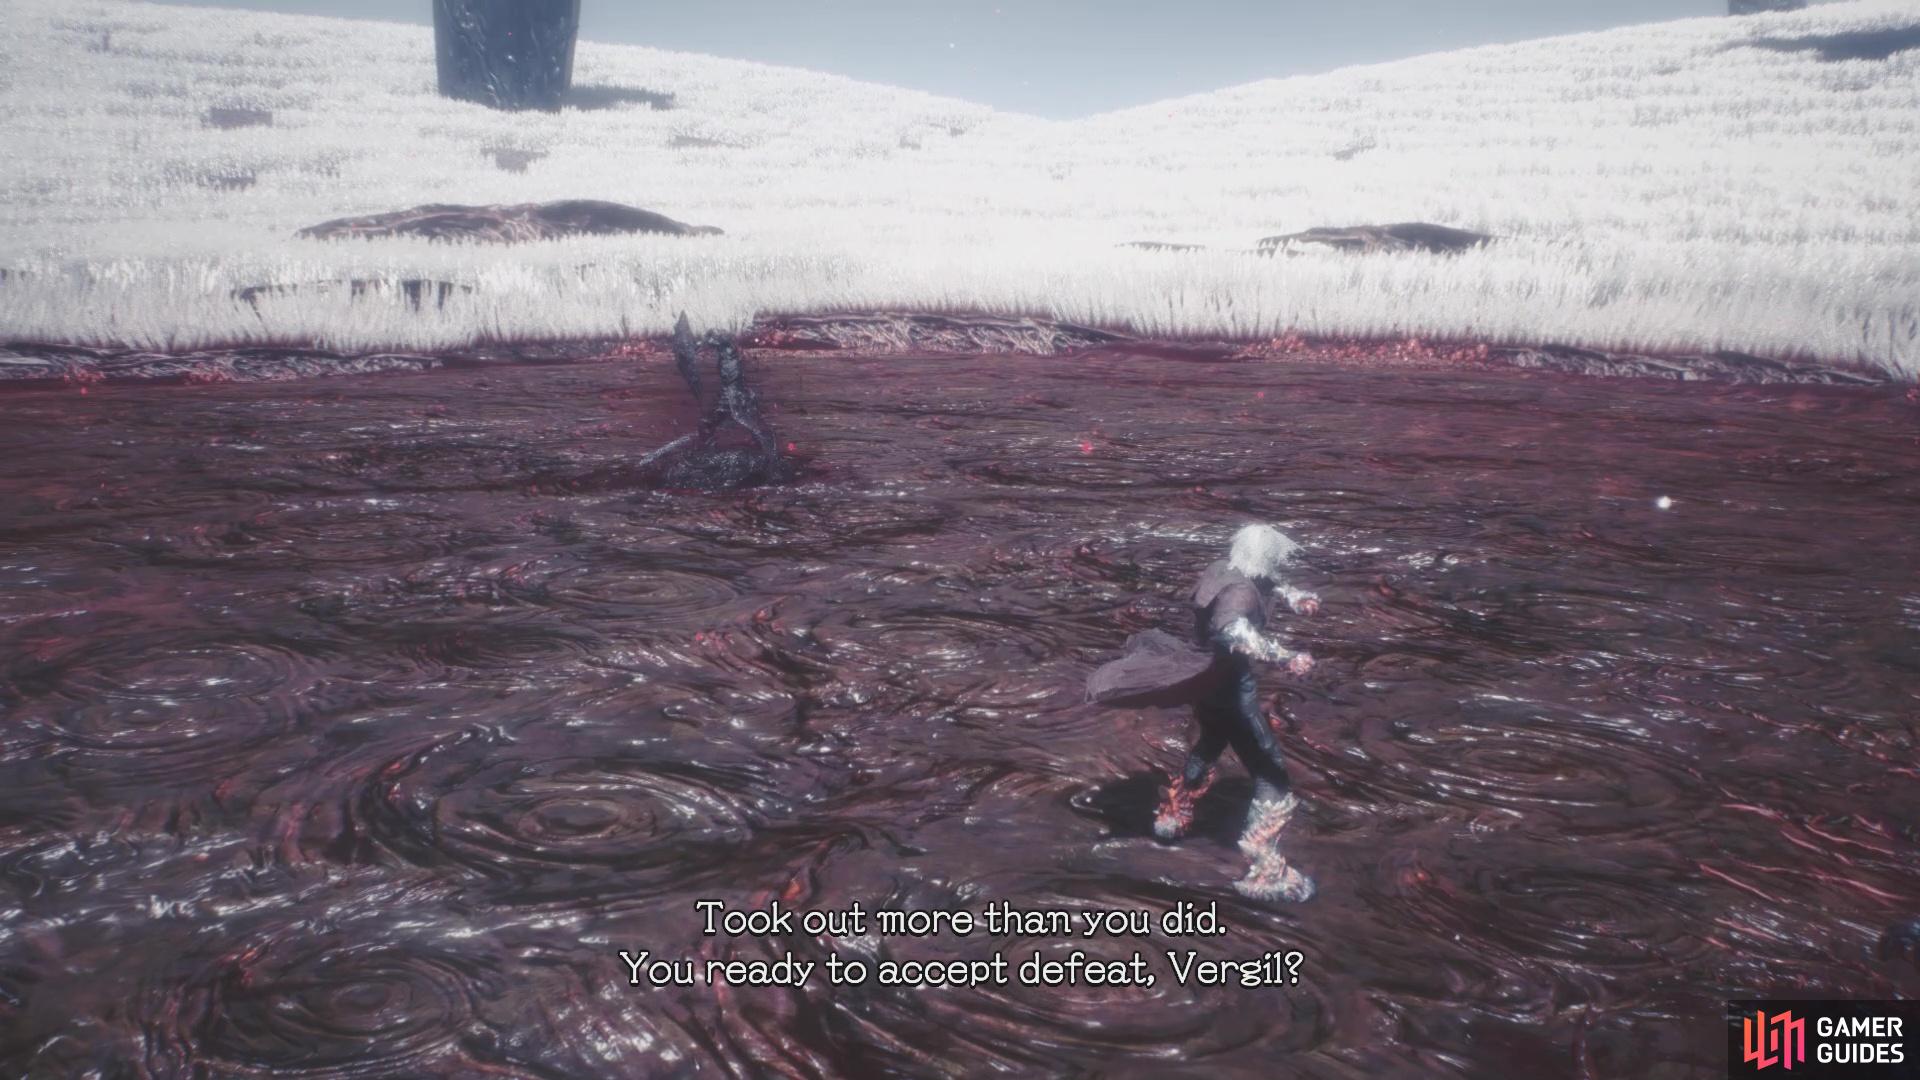 The same holds true with Dante boasting his victory over Vergil